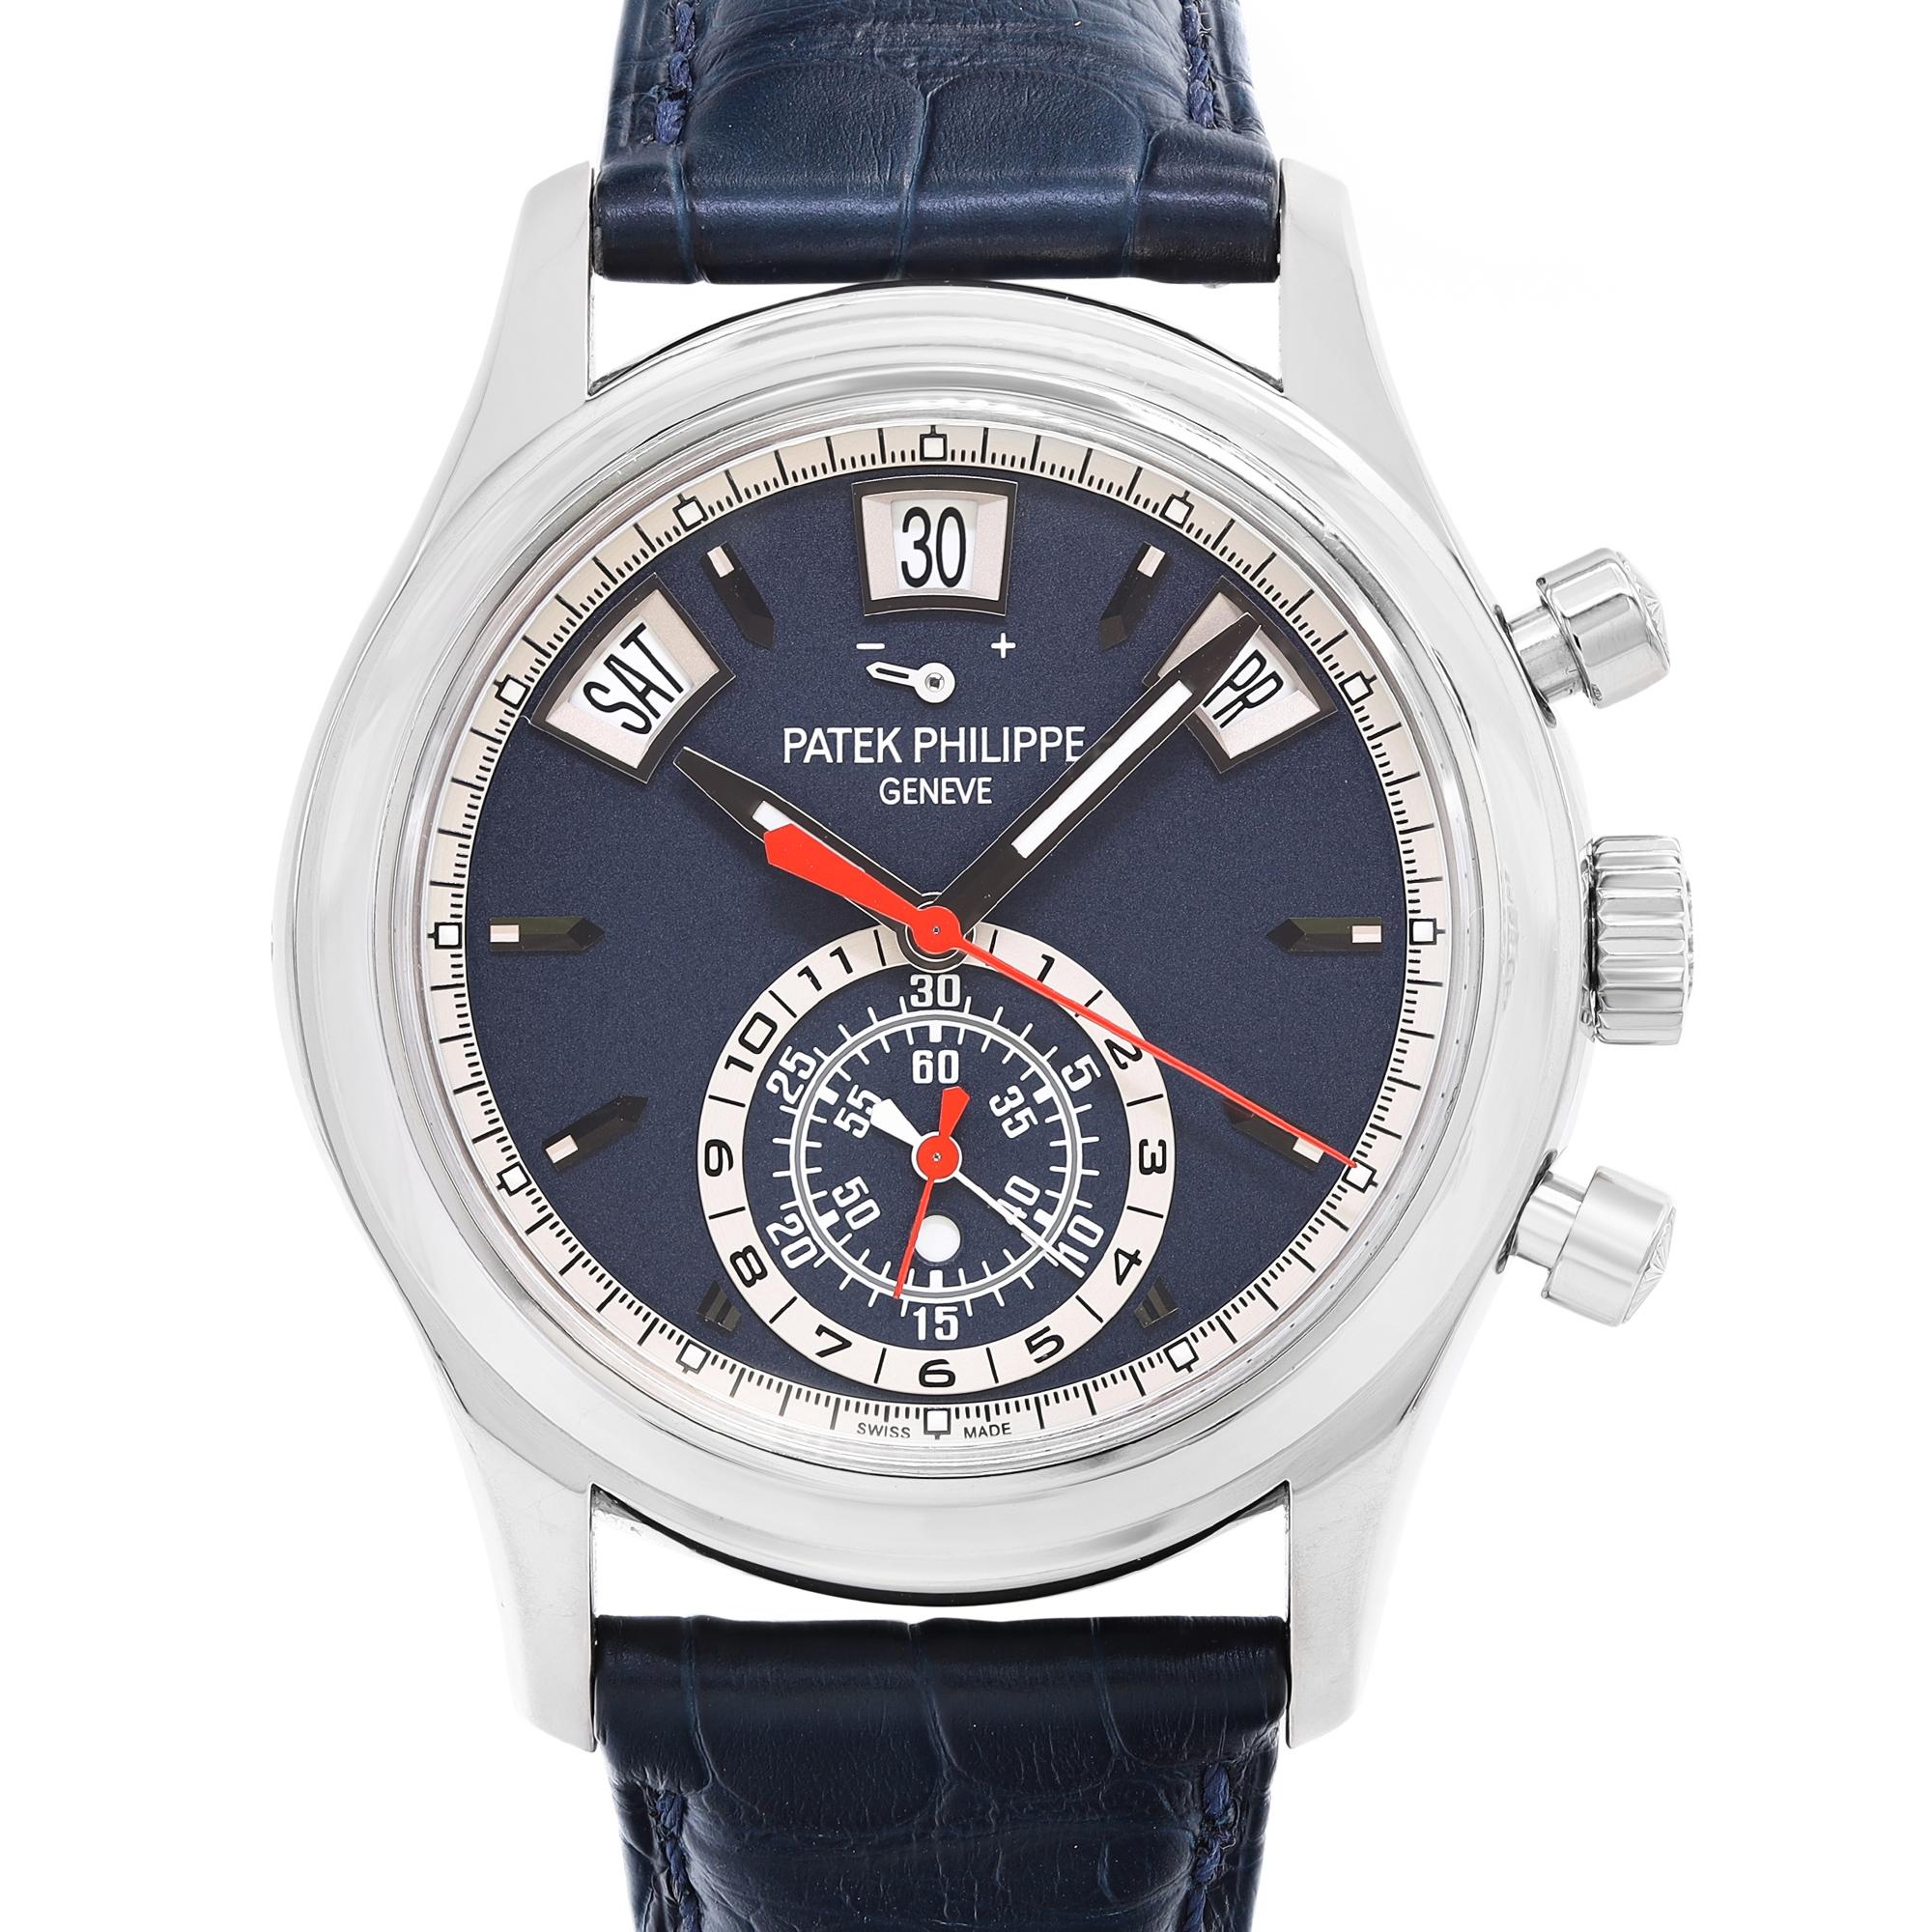 Pre-owned Patek Philippe Complications Annual Calendar White Gold Men's Watch 5960/01G-001. Brand new, 21-16mm, 120-65mm Blue matte leather strap on the 18K white gold deployment buckle. original Band and Deploymnety Buckle not related to this